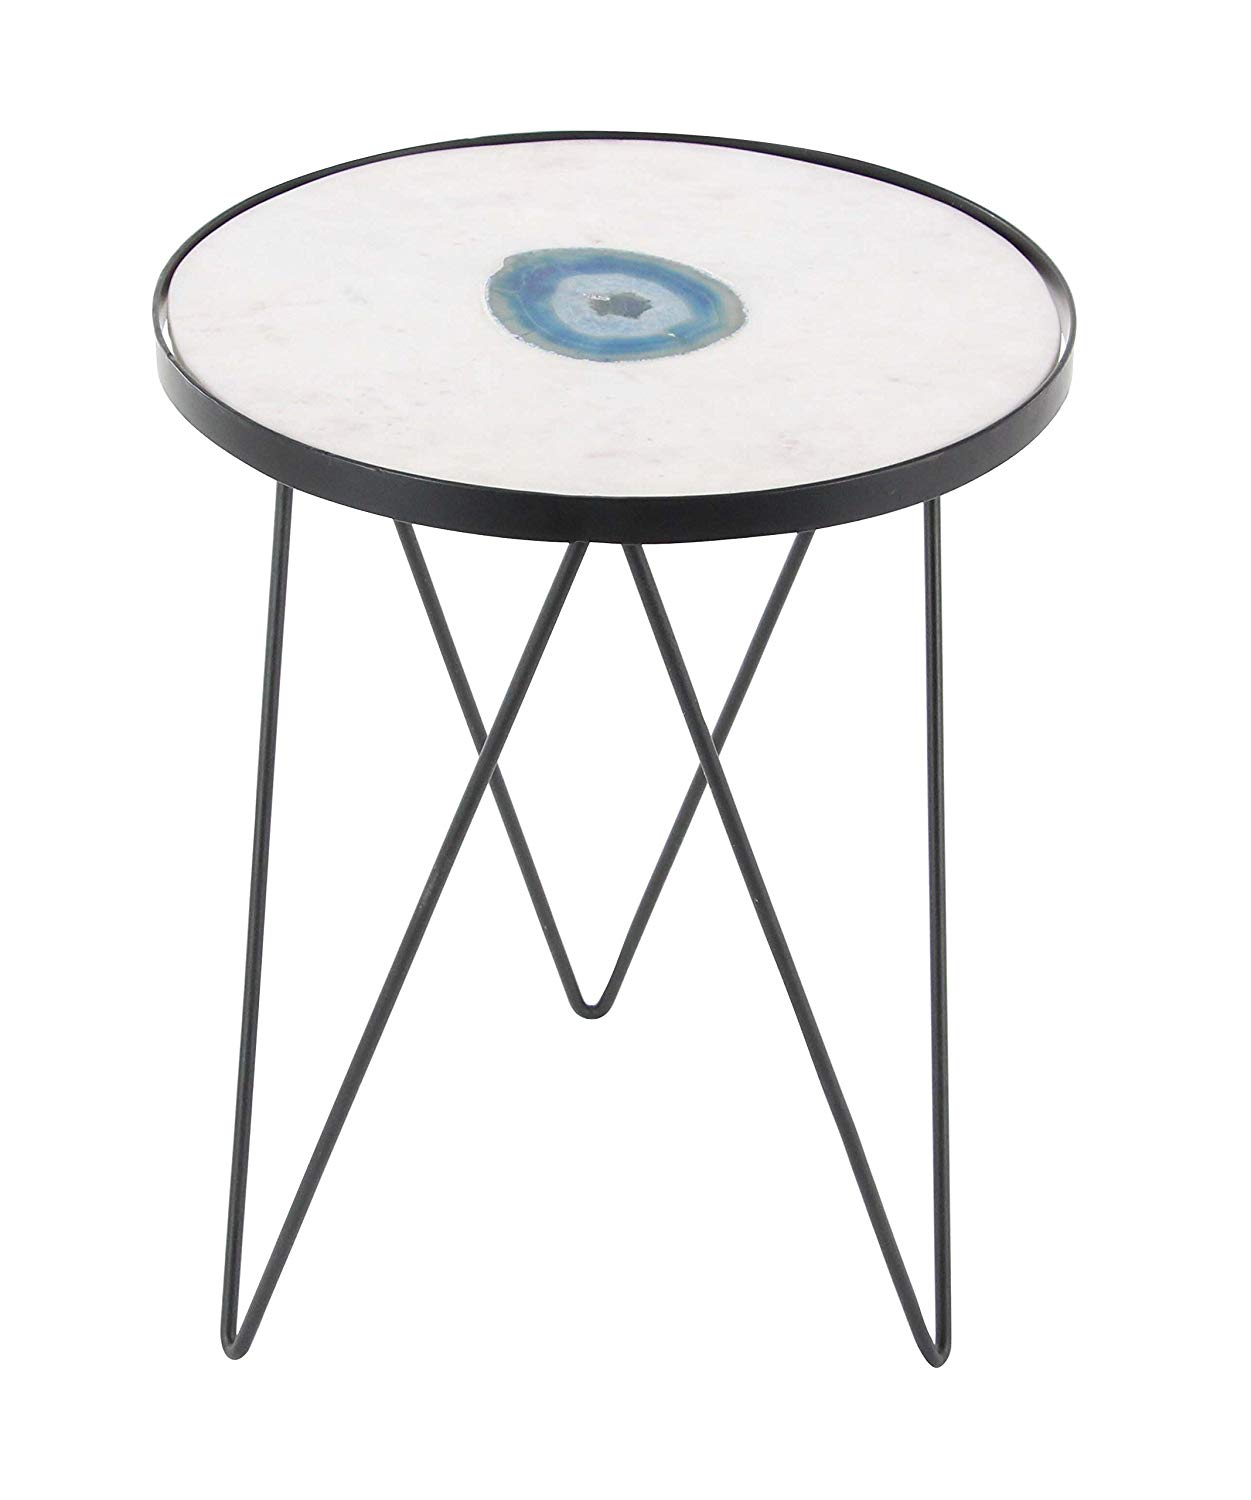 charming white marble and metal round accent table small for faux tablecloth pedestal wooden unfinished wood ideas covers decorating threshold side full size target rose gold pier